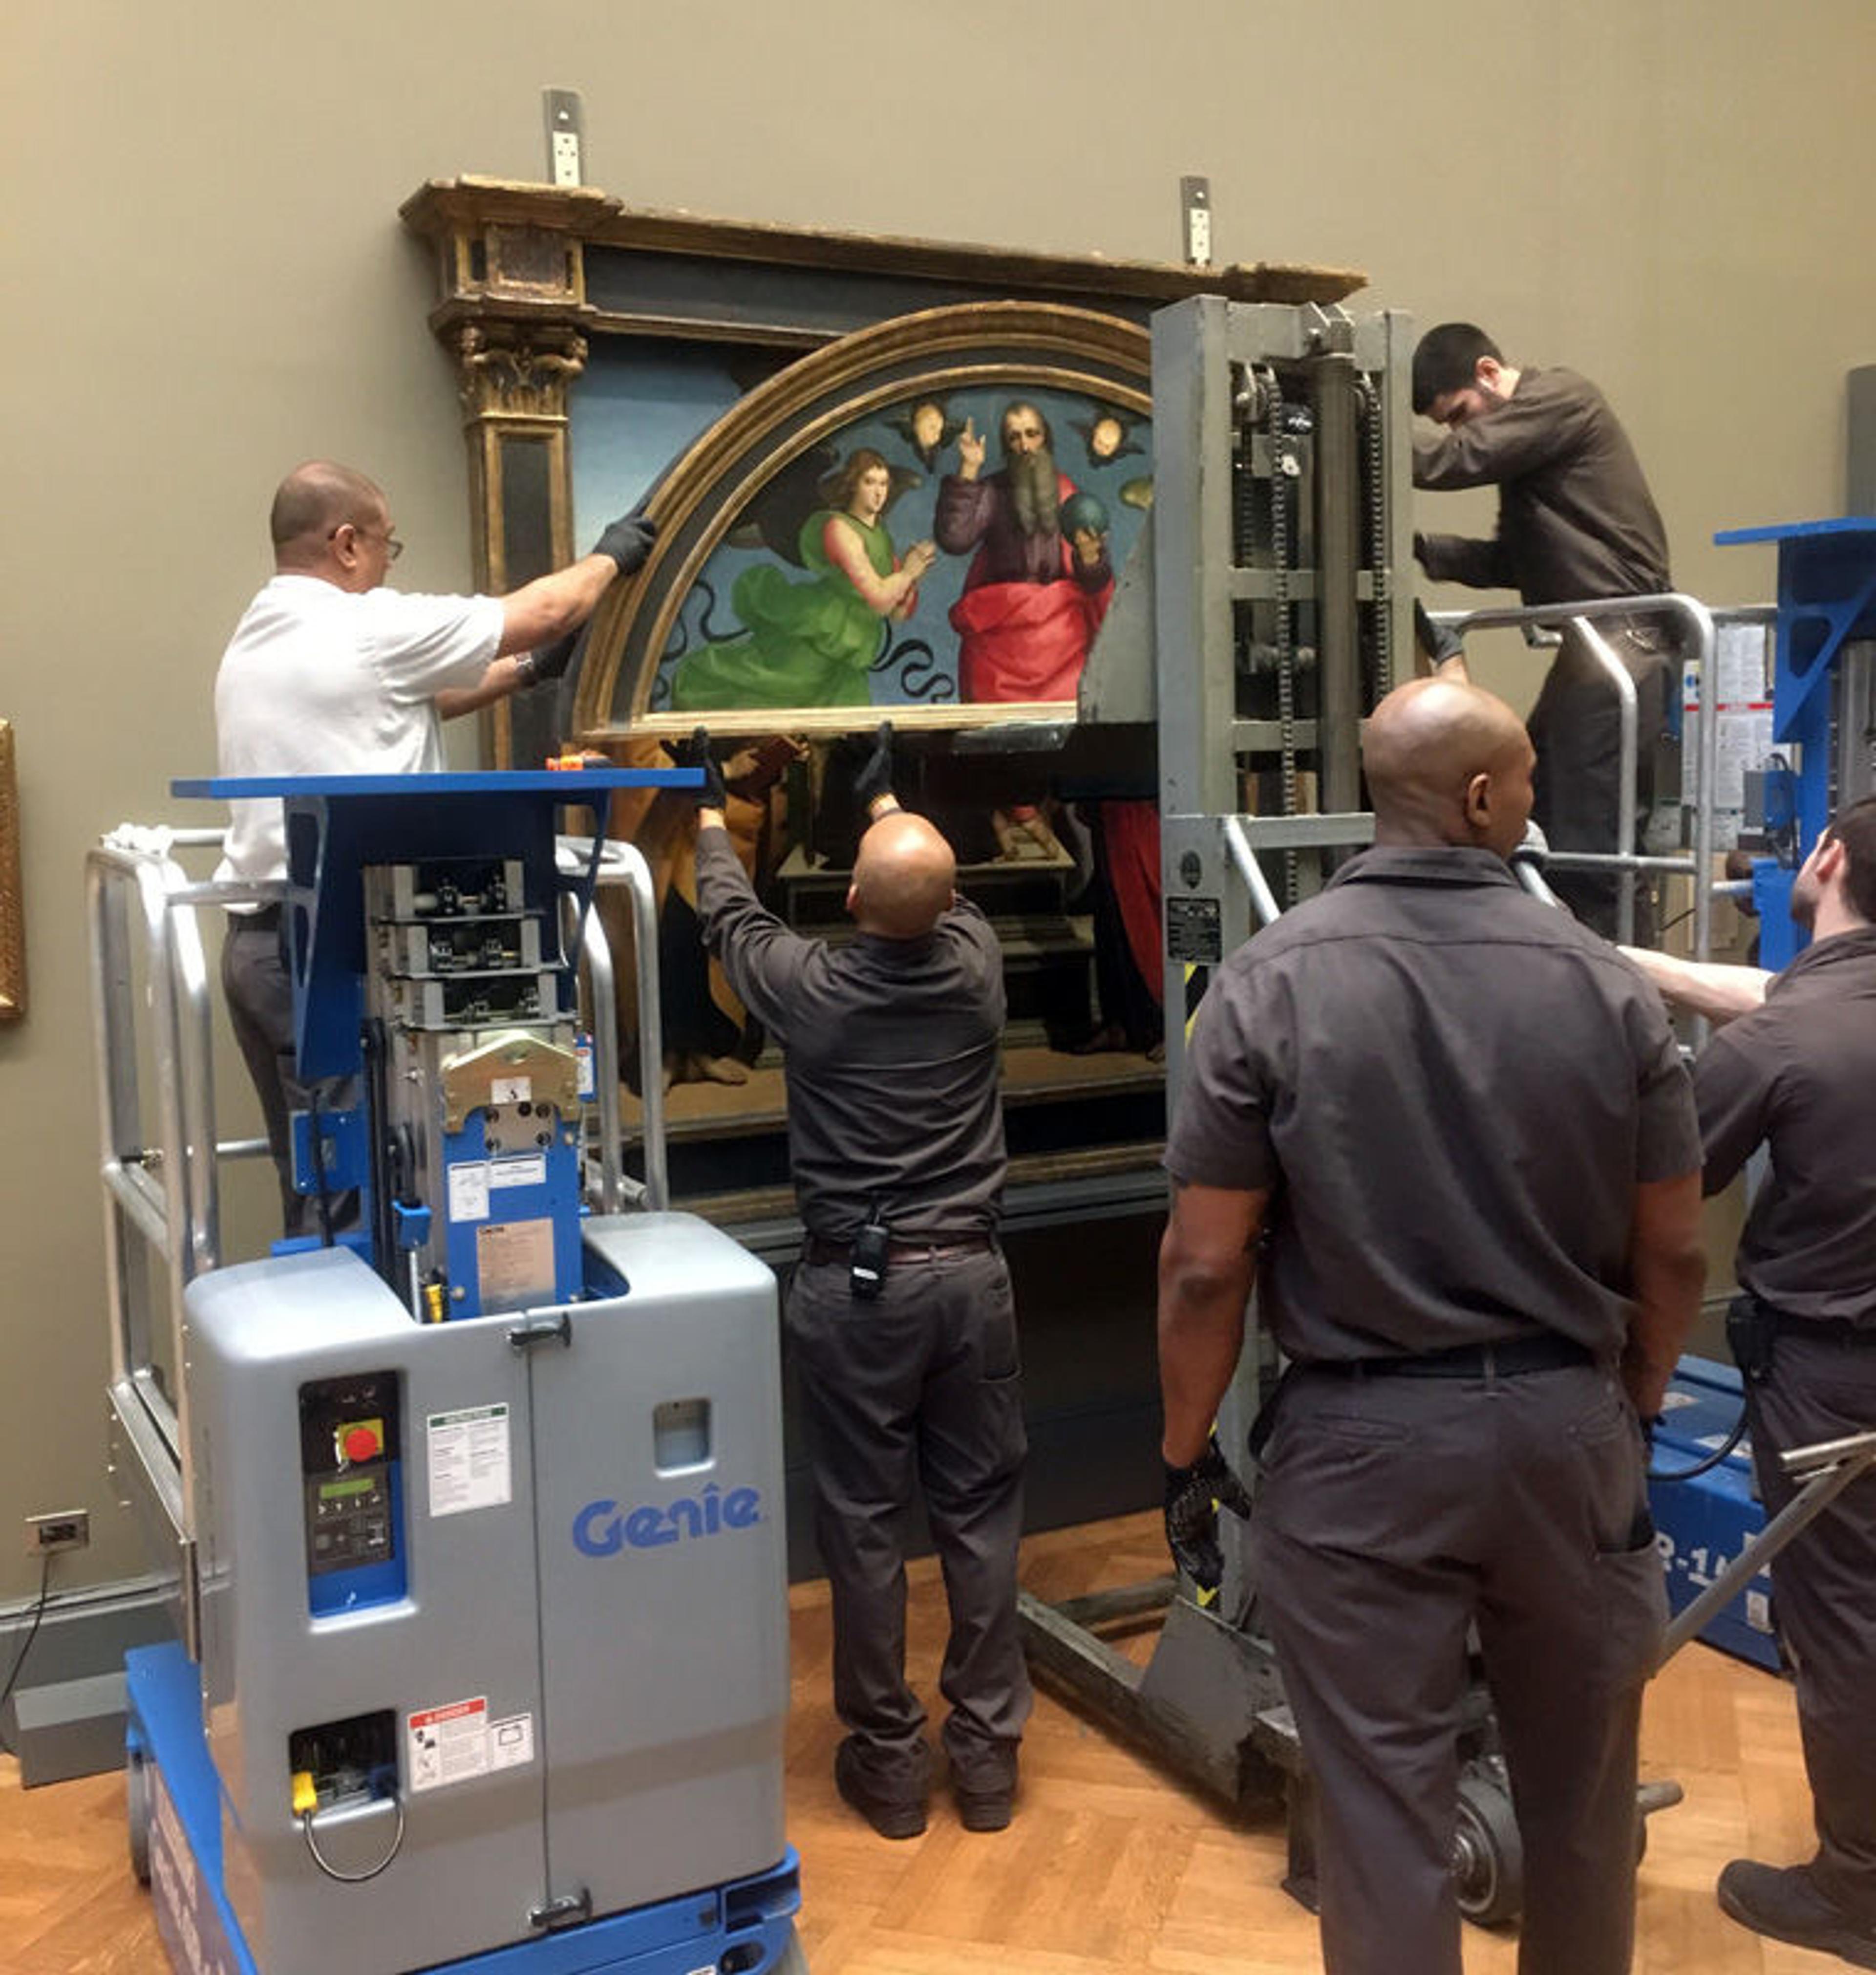 Museum staff remove the lunette (top part) from an altarpiece by Raphael in an art gallery